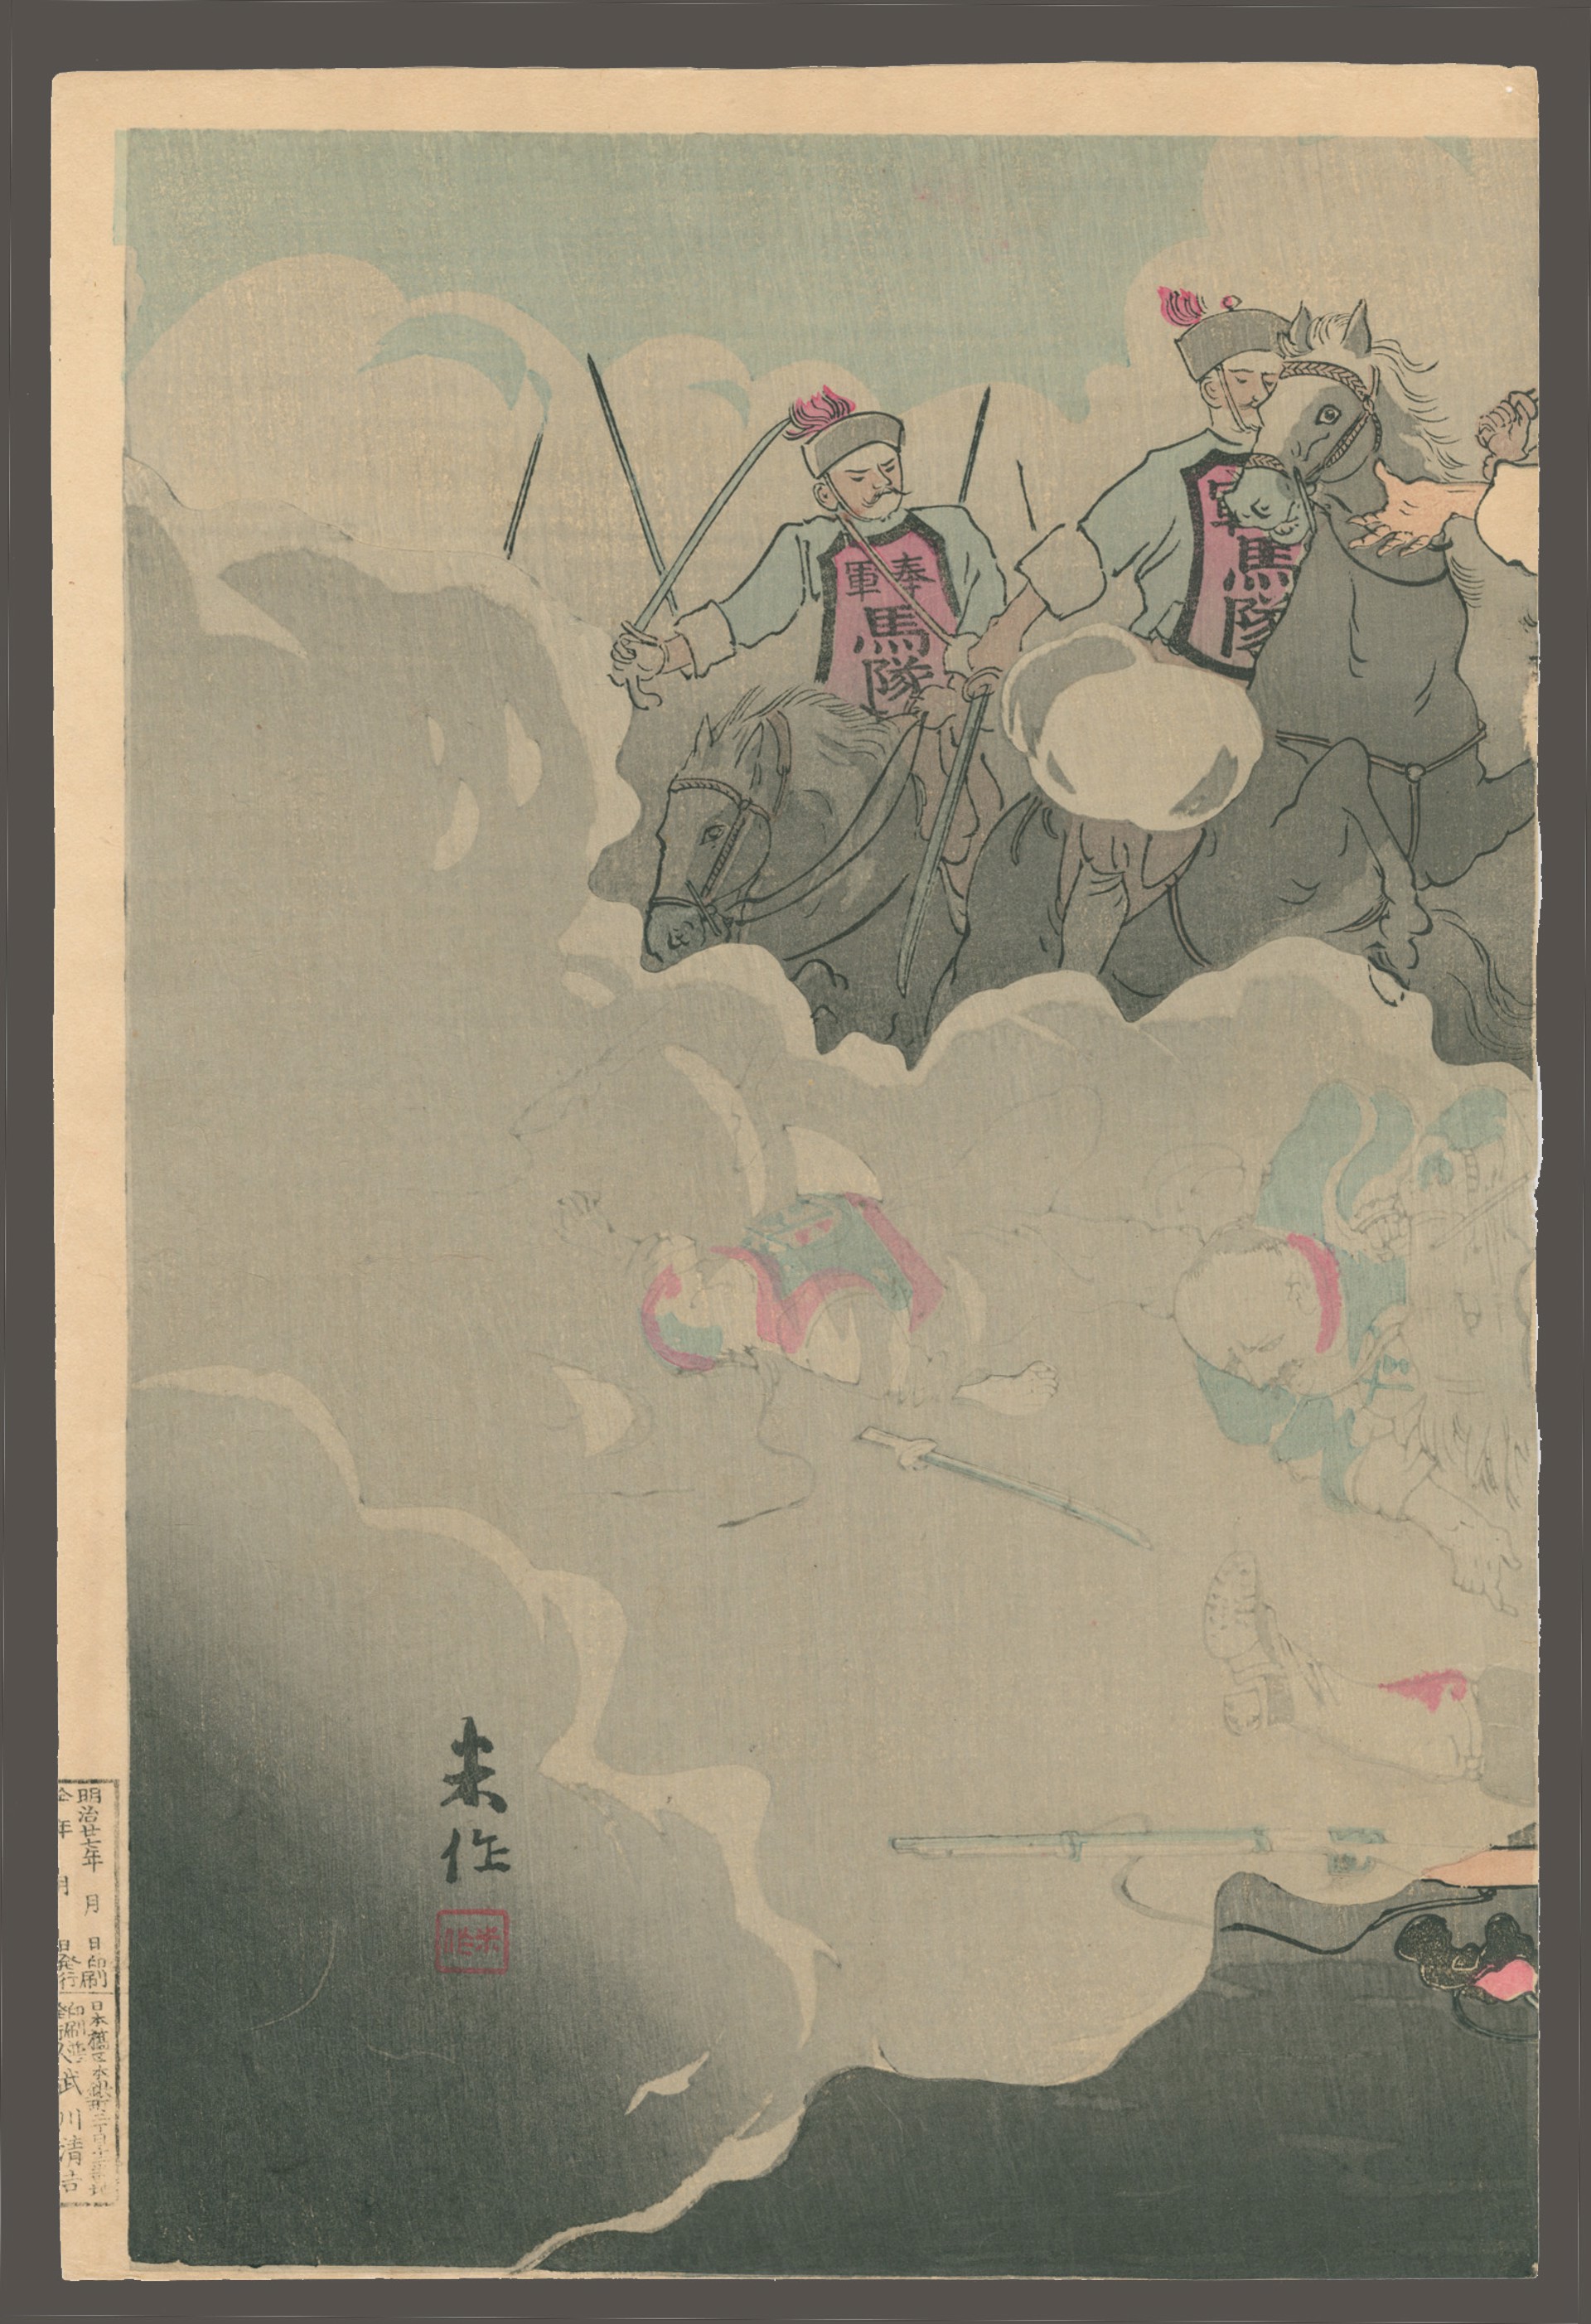 Picture of the Heroic Fight of scout Lt. Takenouchi at Chunghua Sino - Japanese war by Beisaku